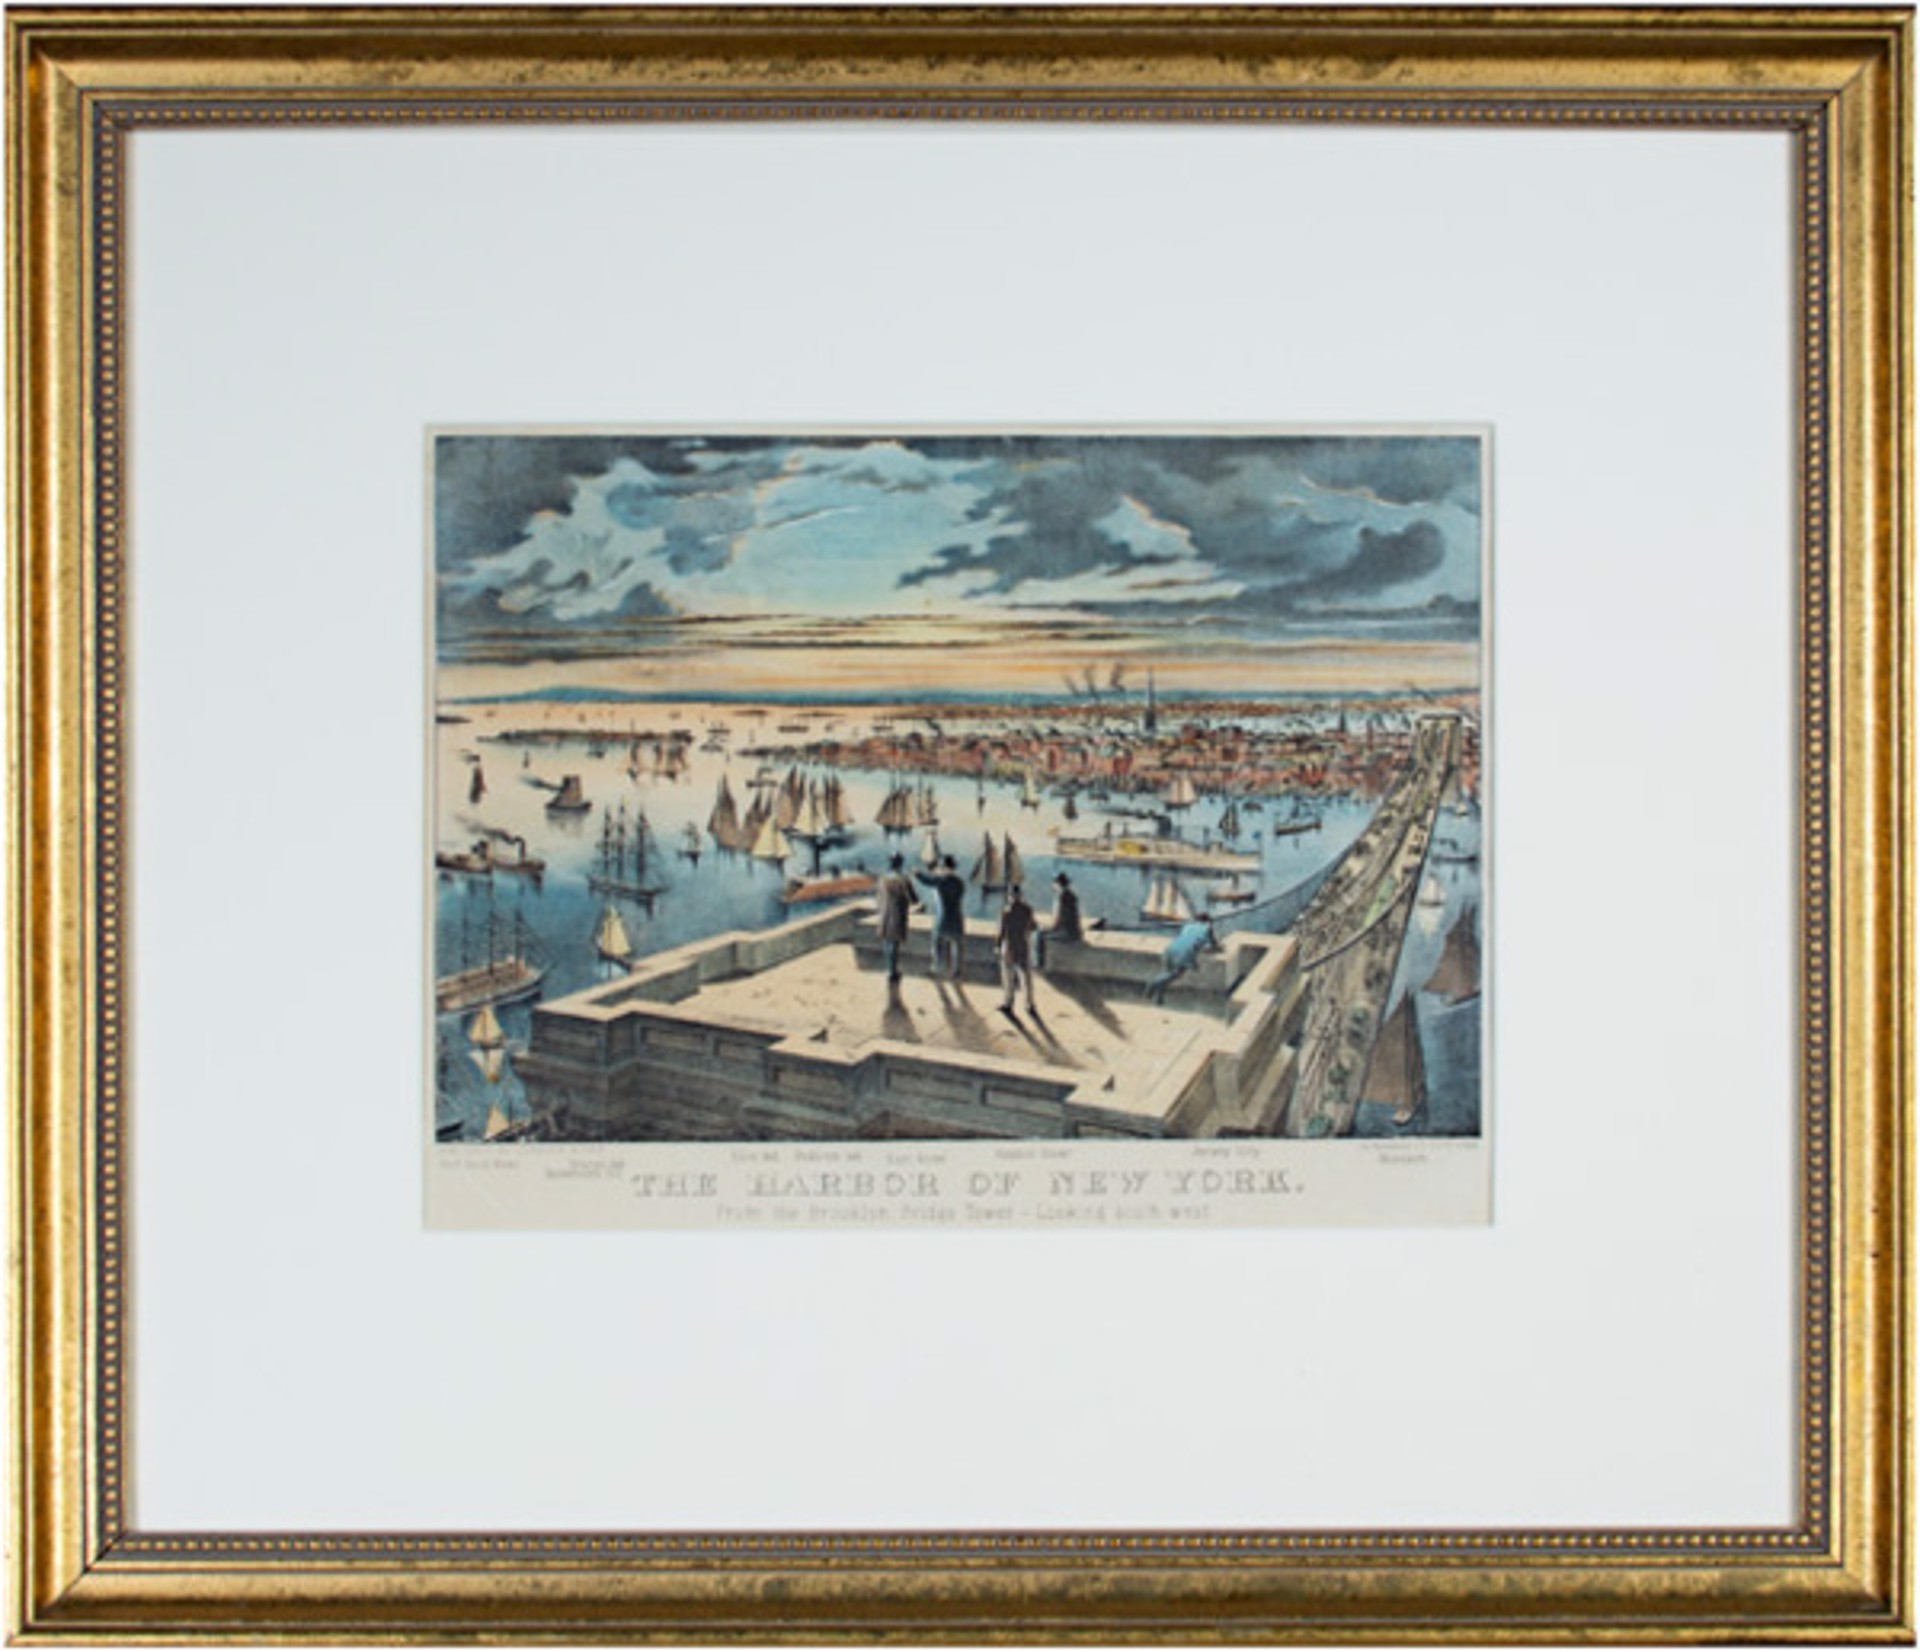 The Harbor of New York, From the Brooklyn Bridge Tower - looking south-west (Best- 50) by Currier & Ives